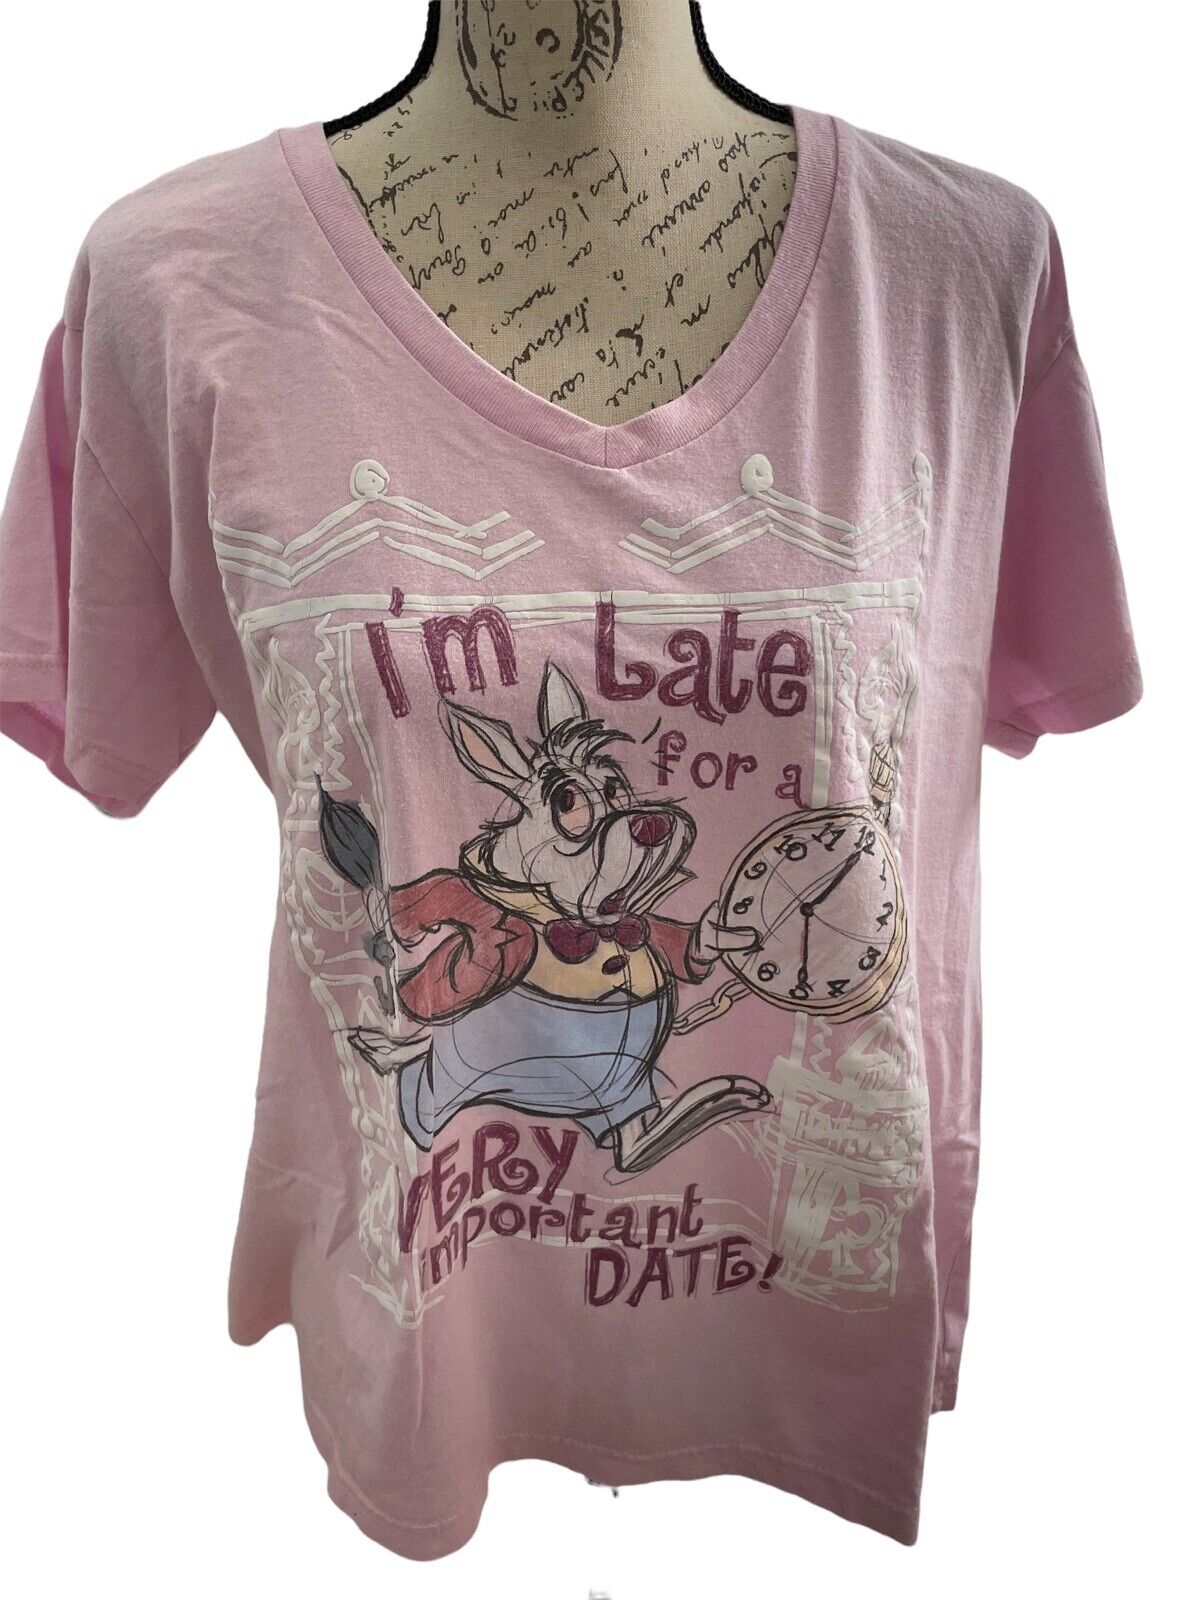 DISNEY STORE ALICE in Wonderland “ I am late for a Very Important Date” Pink 2XL